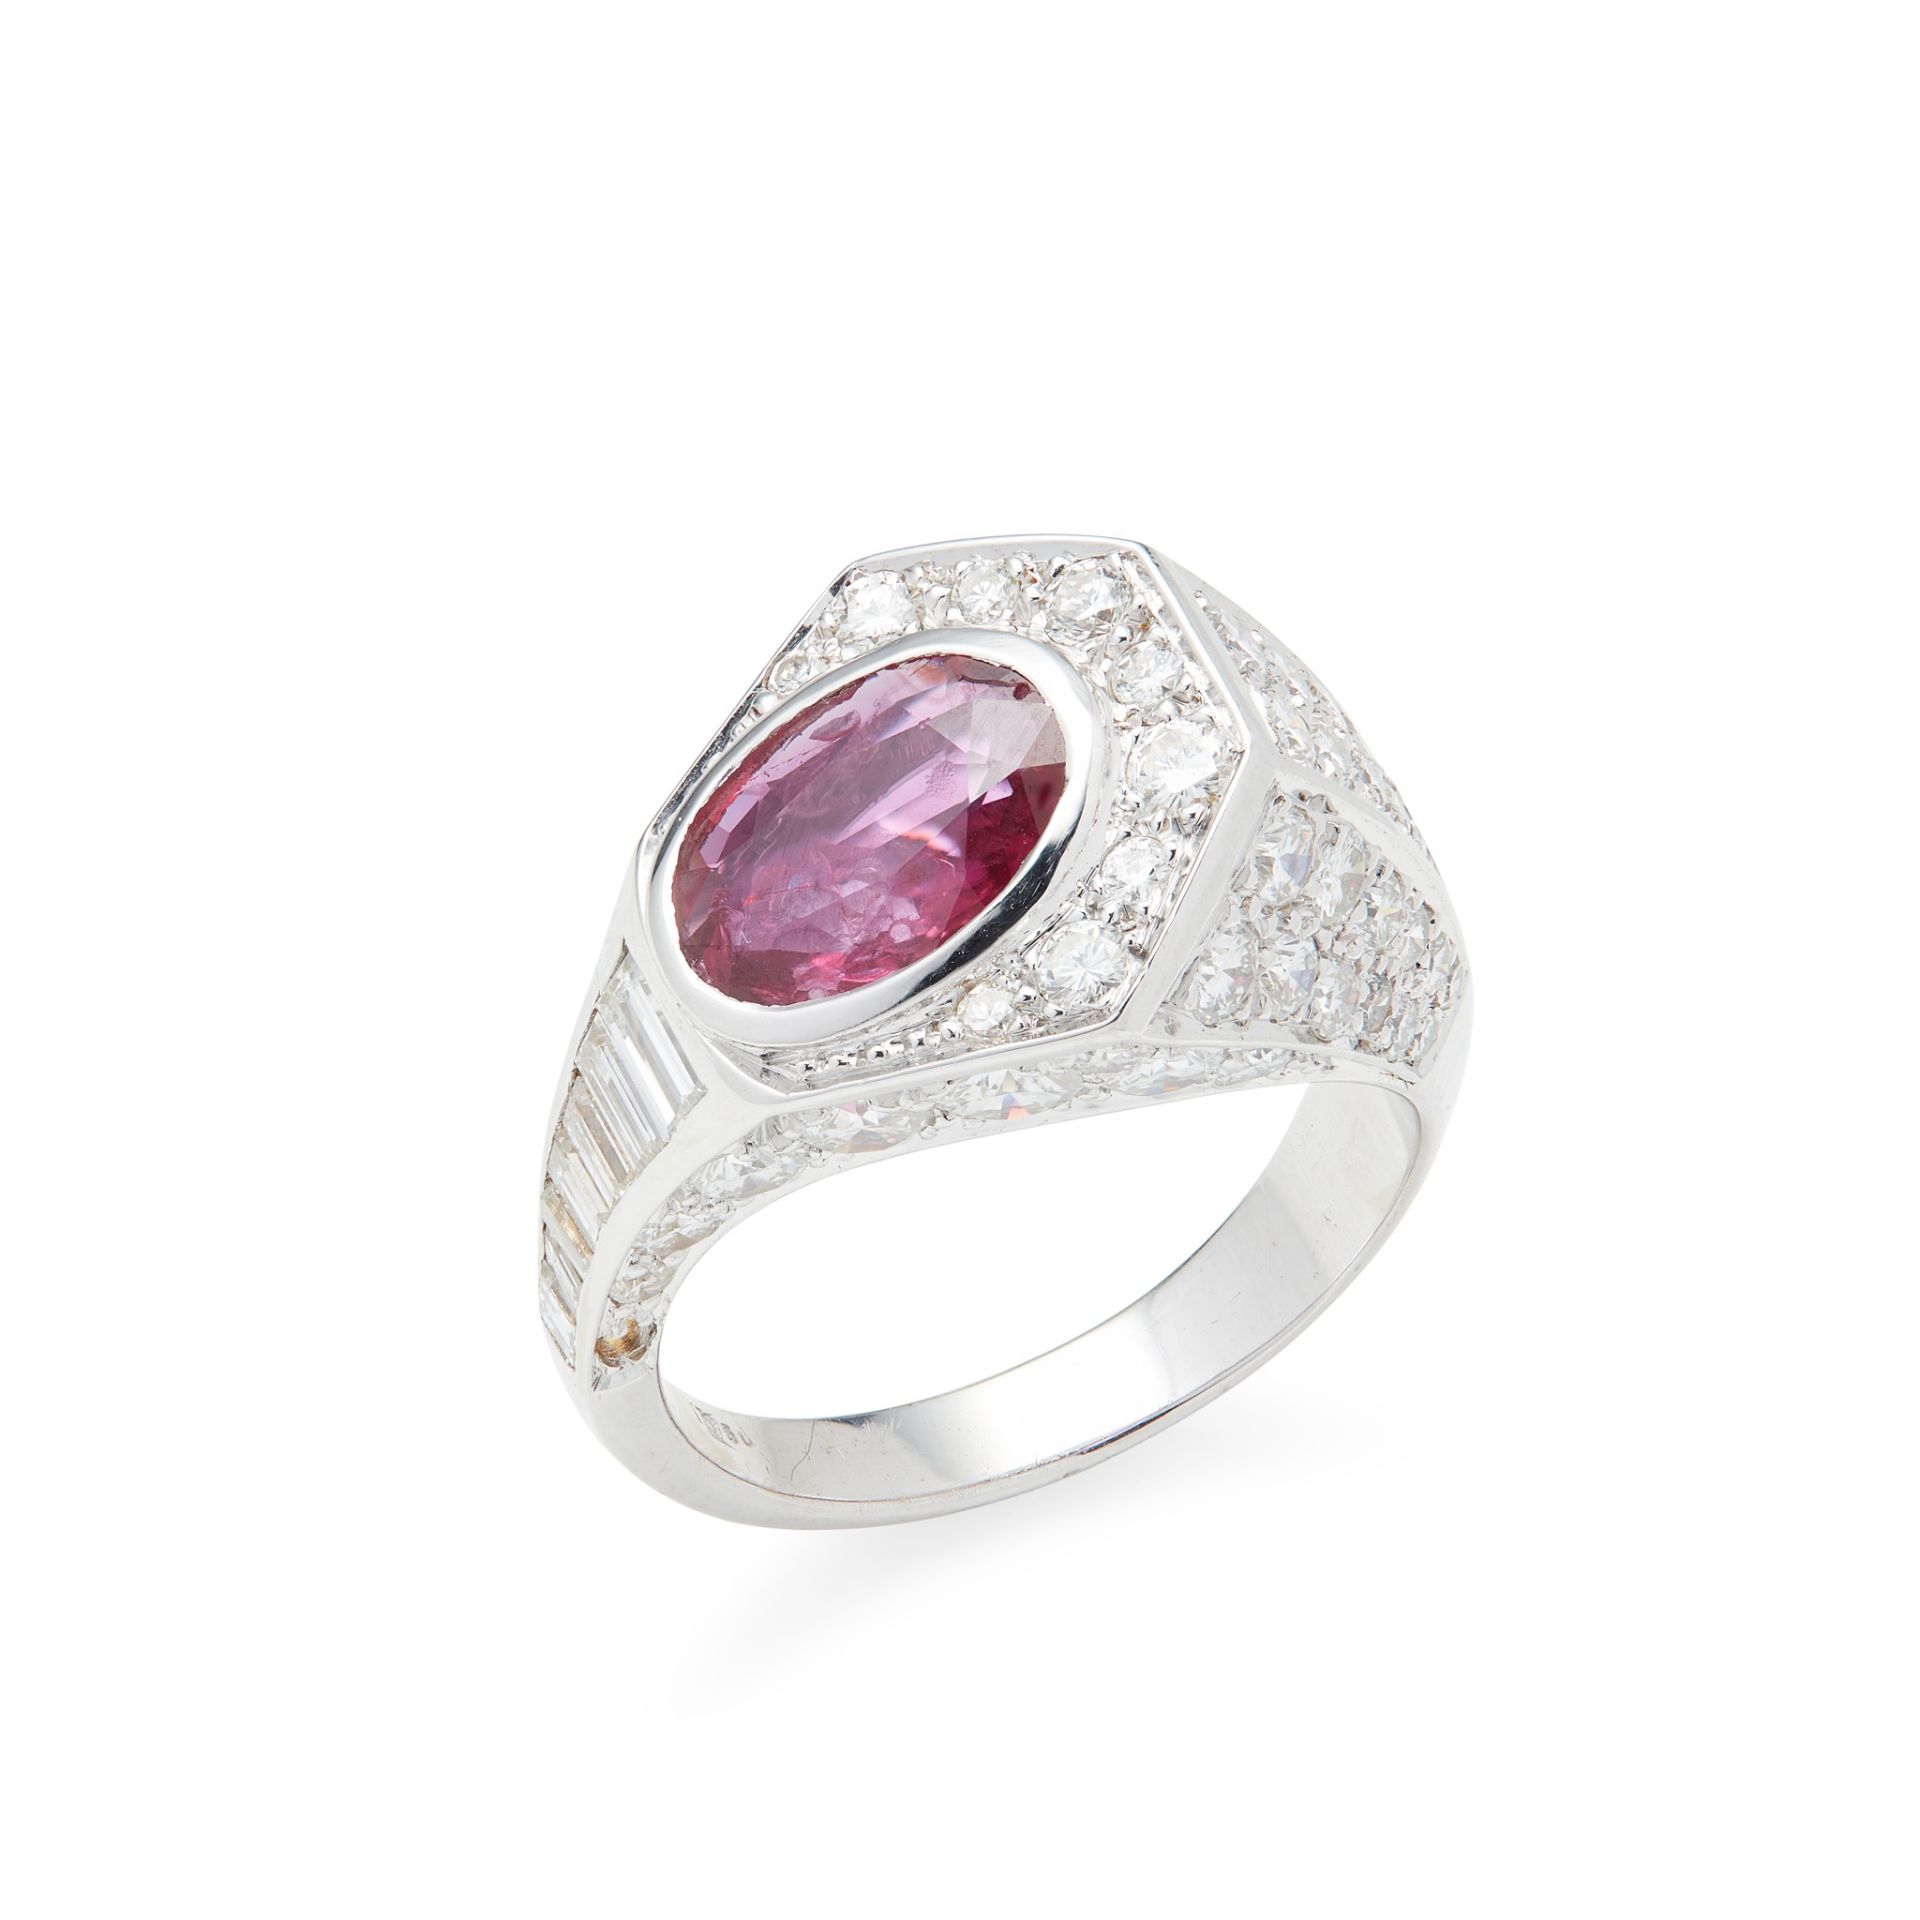 A ruby and diamond set cocktail ring